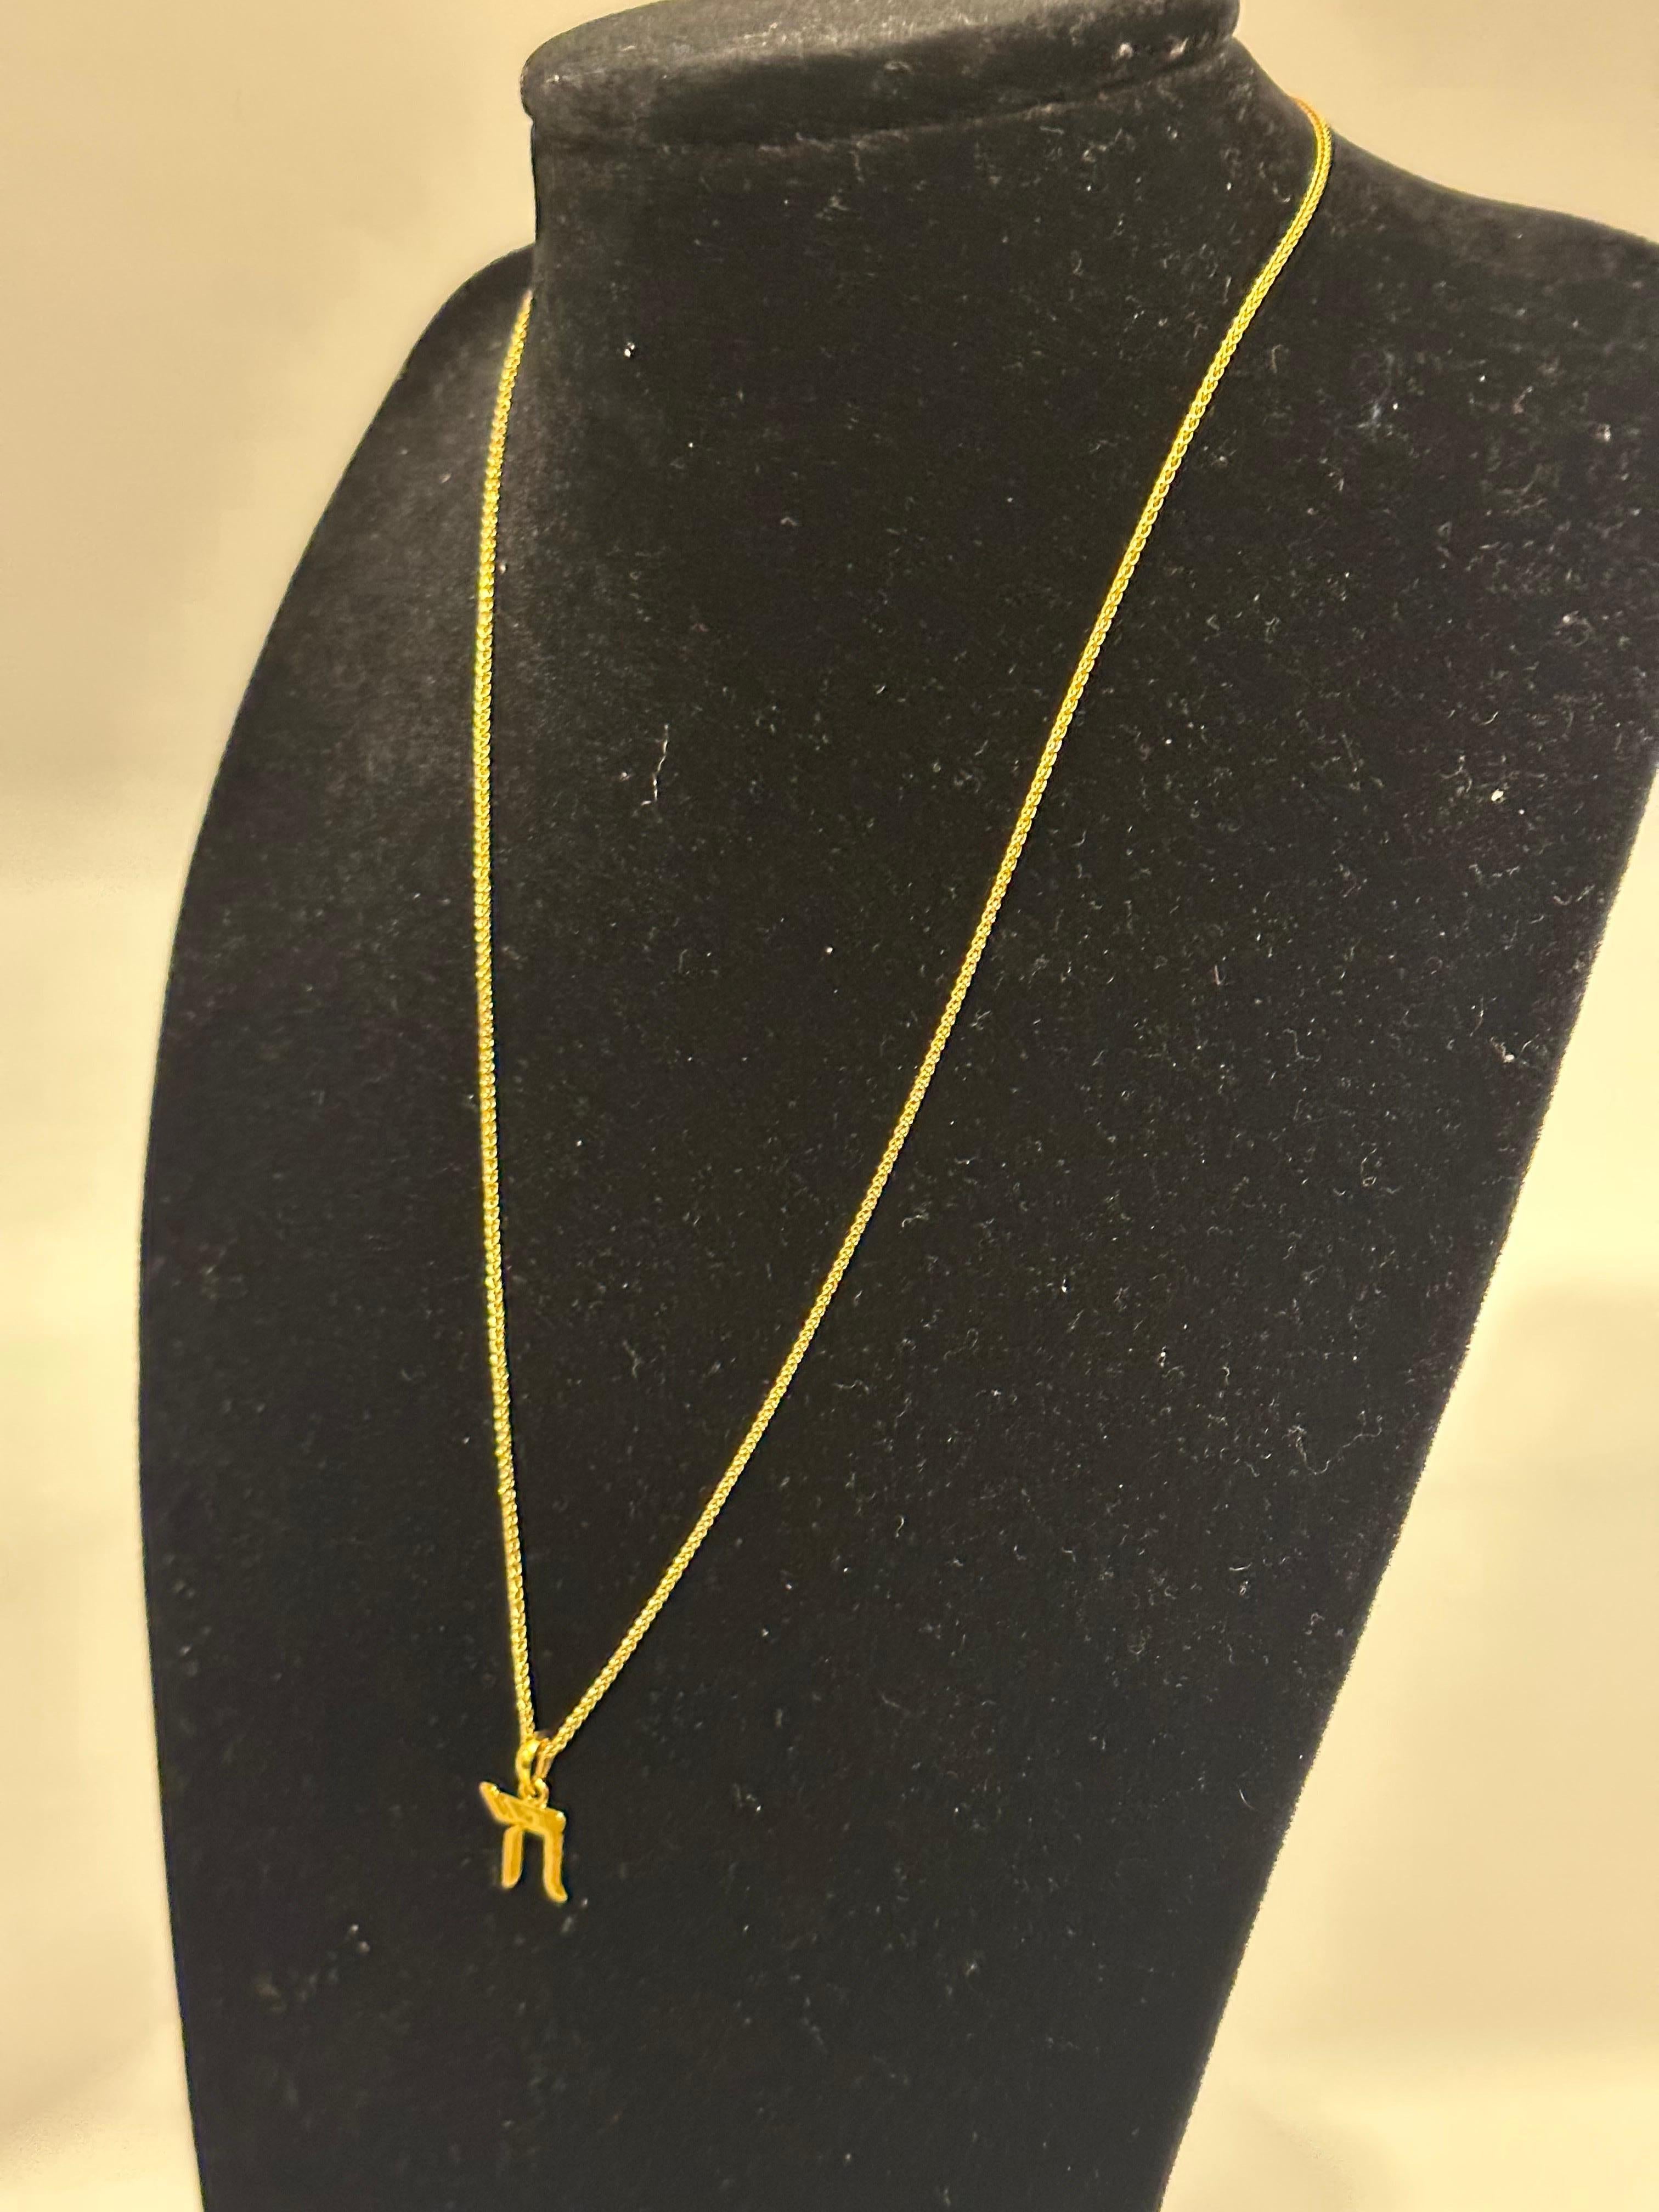 14K Gold Masculine Chai Pendant With 14 Karat Yellow Gold Chain, Jewish Jewelry
This Simple yet elegant Necklace  consisting of a solid 14 Karat gold  Chai pendant and 14 Karat Yellow gold chain 
Unisex
Chain Length 16 inch adjustable to 18 